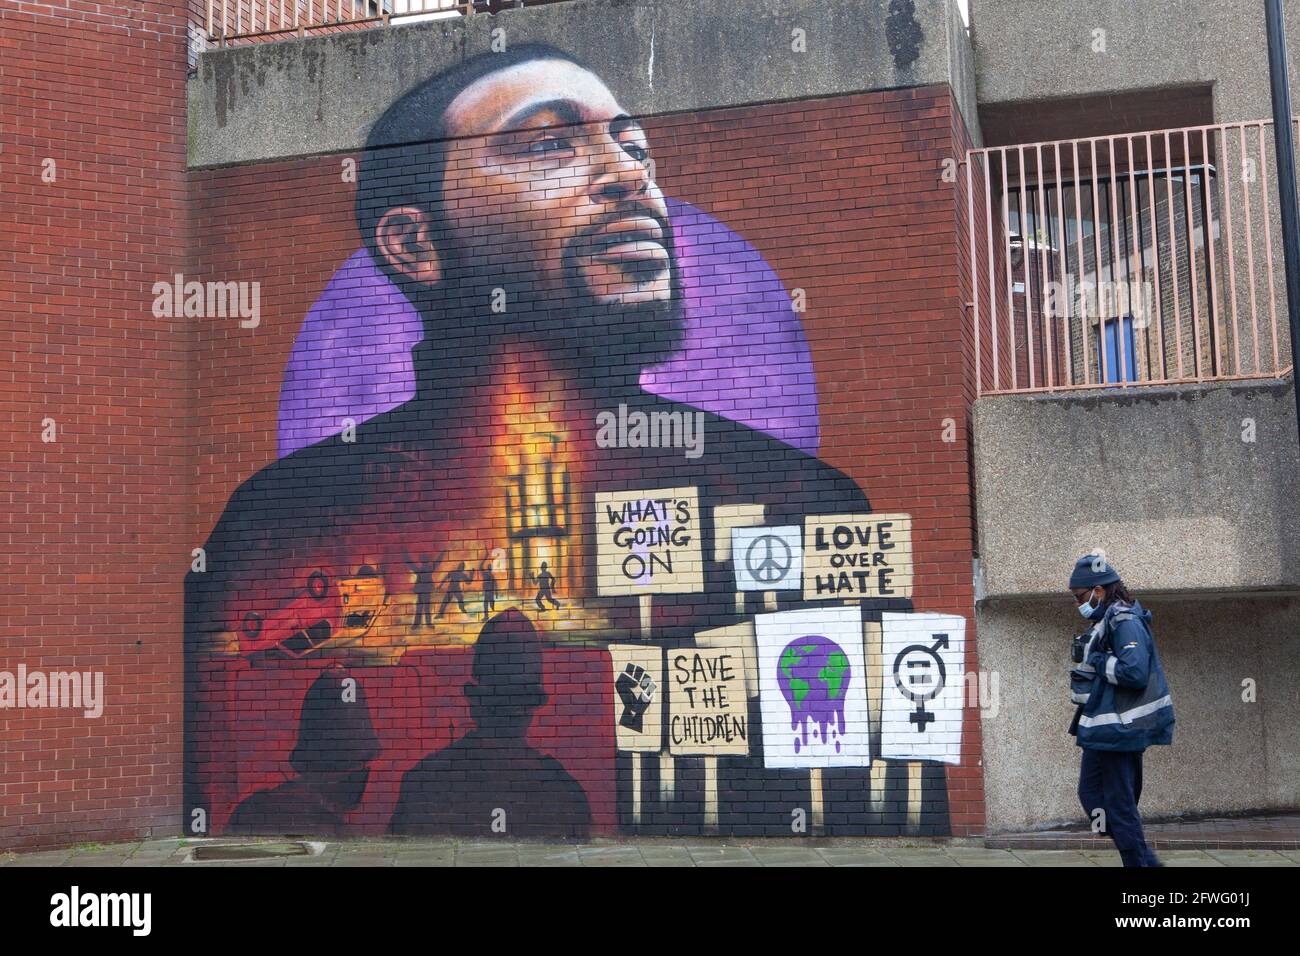 London, UK, 22 May 2021: The artist Dreph (Neequaye Dreph Dsane) has painted a mural of Marvin Gaye in Brixton, which also references the Brixton Uprisings of 1981. Commissioned by Universal Music Group, the mural commemorates this week's 50th anniversary of the release of Gaye's iconic album 'What's Going On'. This year is also the 40th anniversary of the Brixton Uprisings which started in protest against police violence. The location on Canterbury Crescent is next to Lambeth Council's former offices at International House and just a few metres away from Brixton police station. Anna Watson/Al Stock Photo